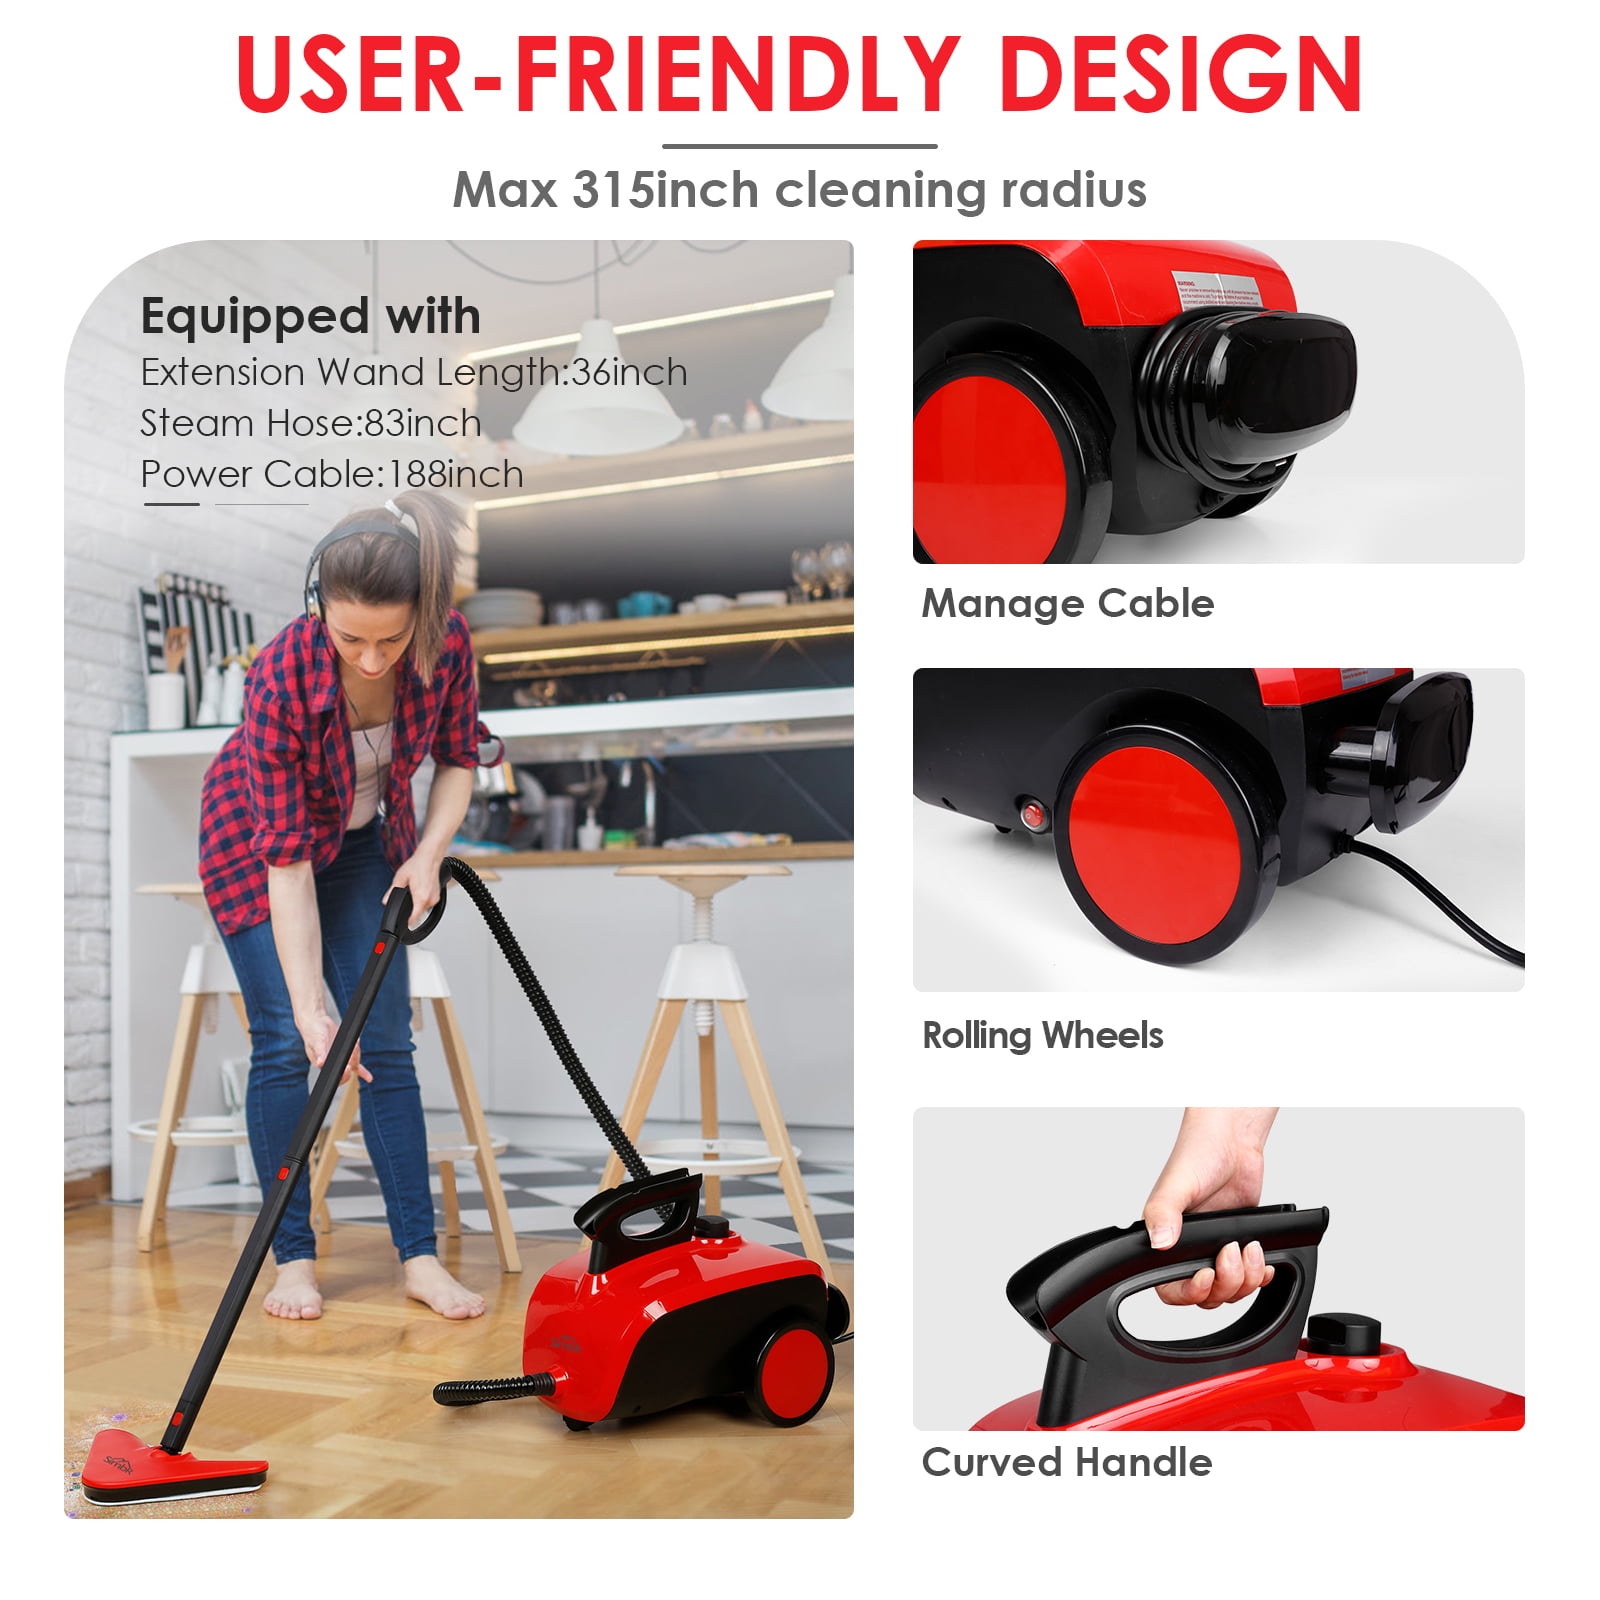 Yescom 1500W Multifunctional Steam Cleaner 13 Accessories Chemical-Free Cleaning Home